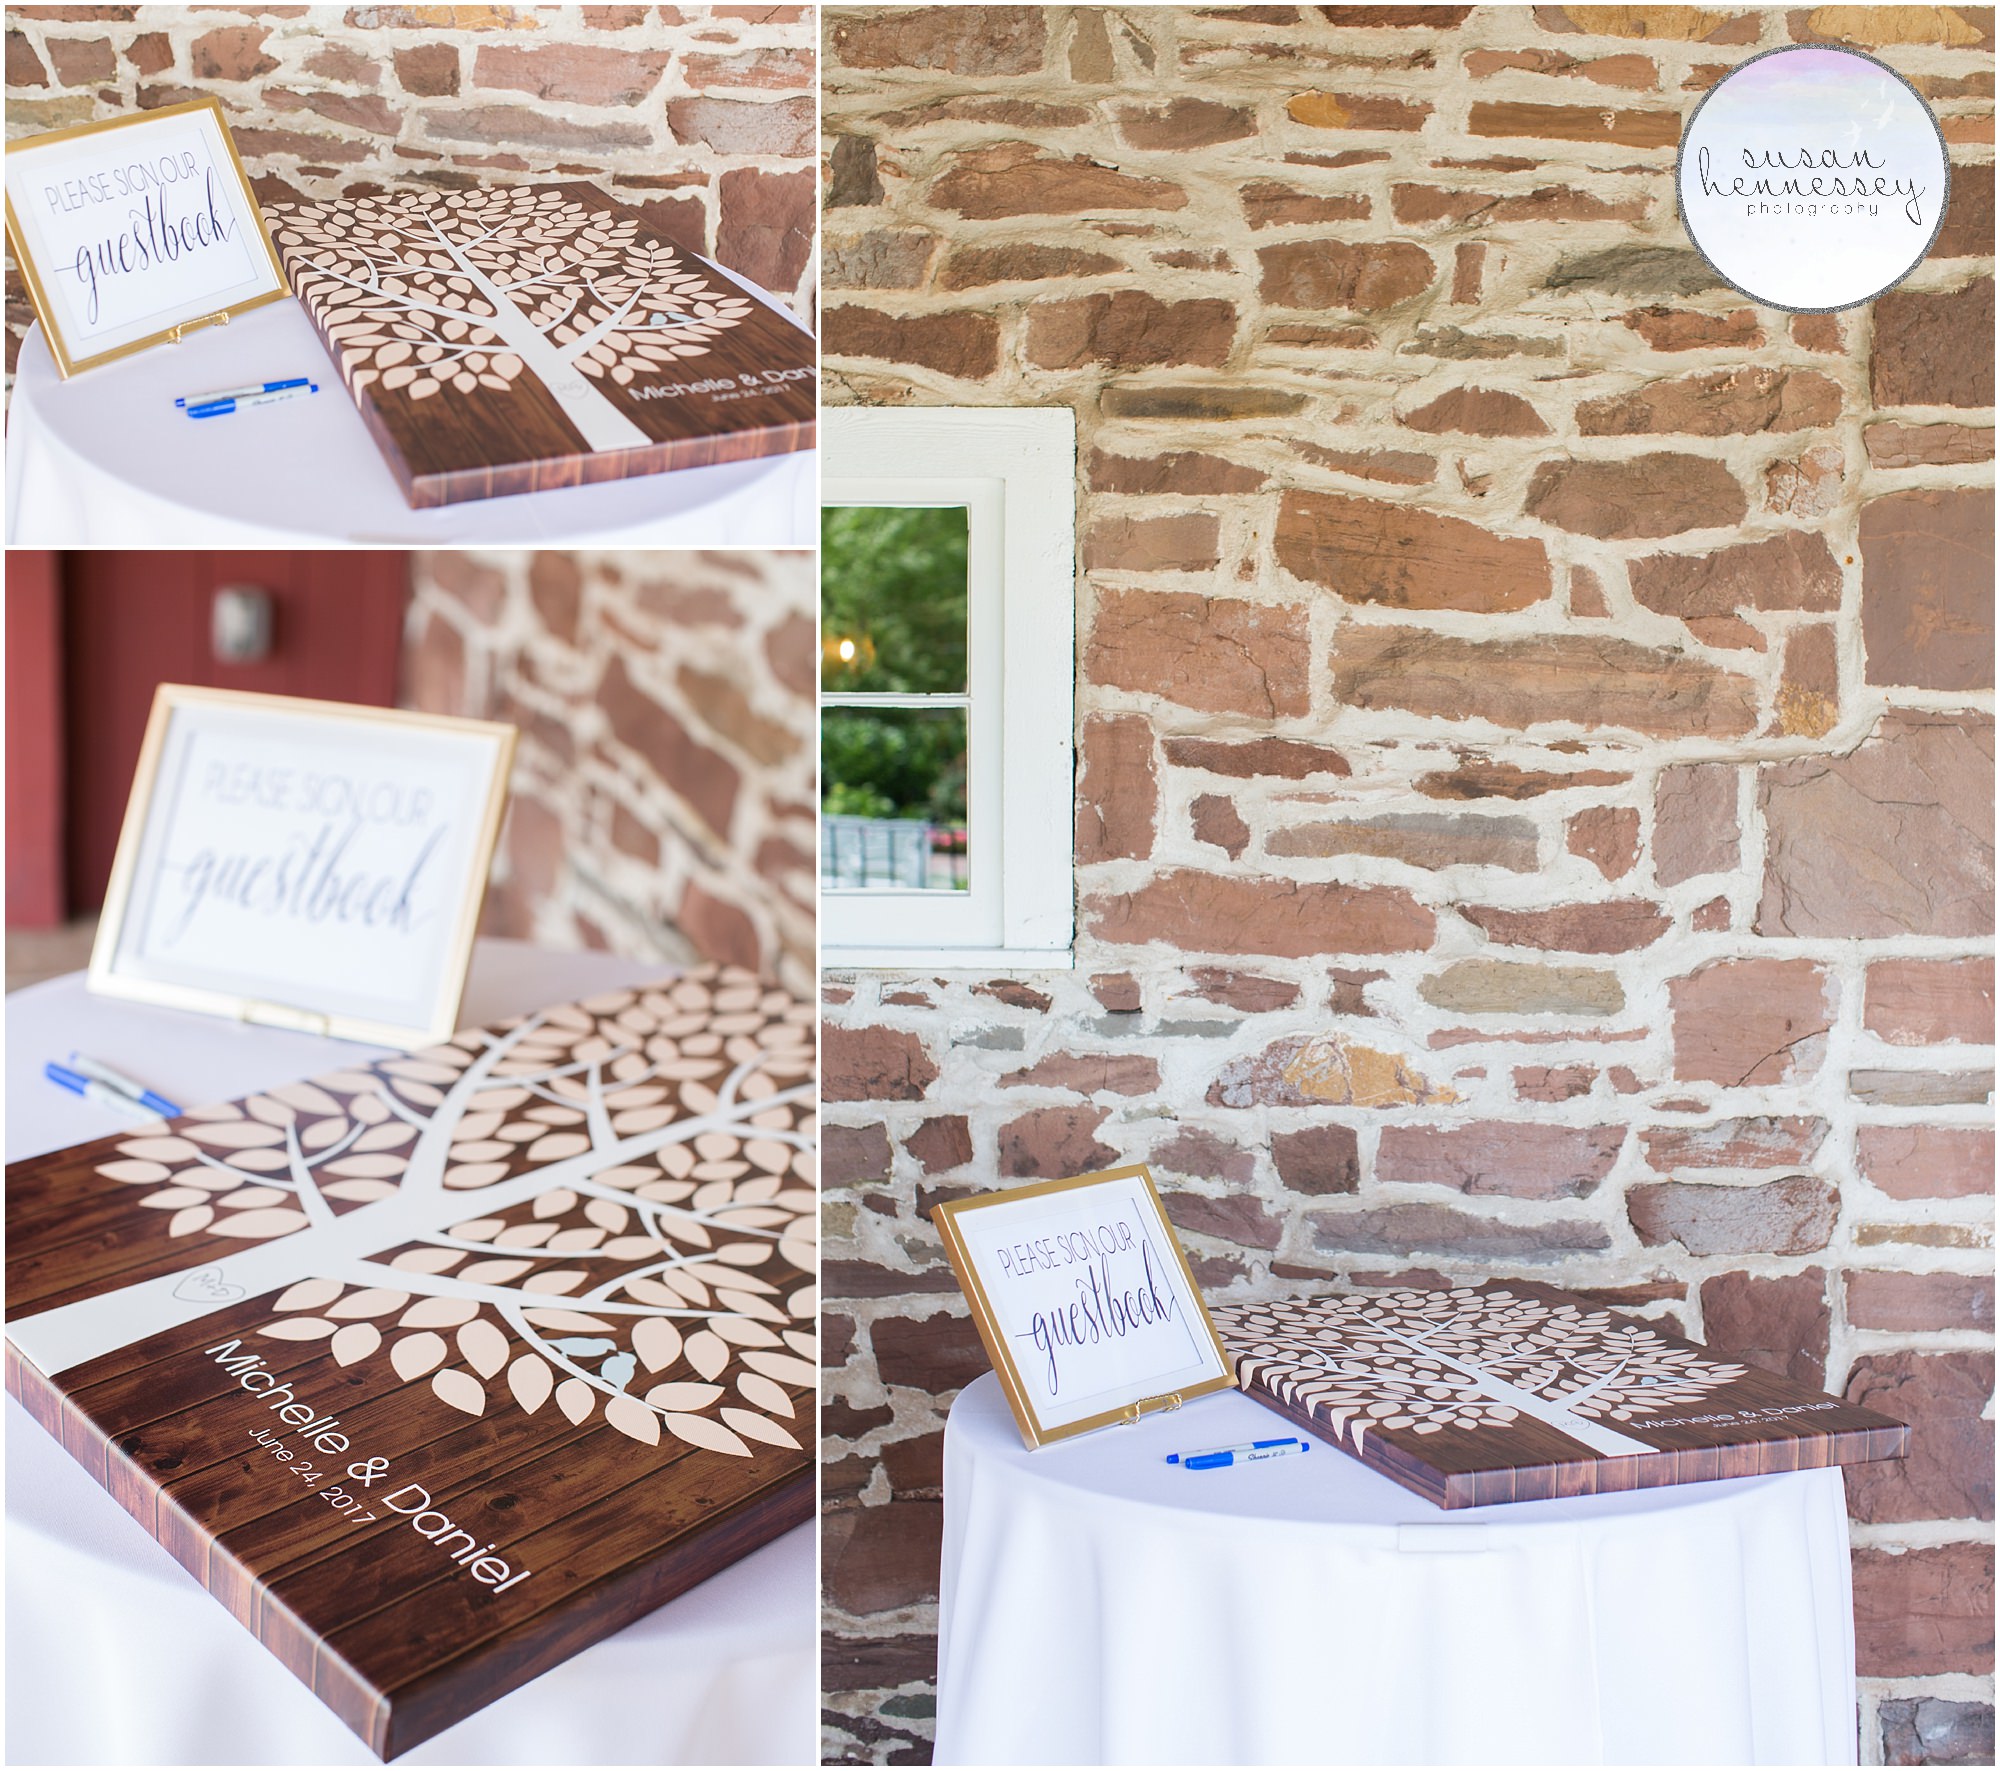 Guest book details at Barn on Bridge in Collegeville, PA